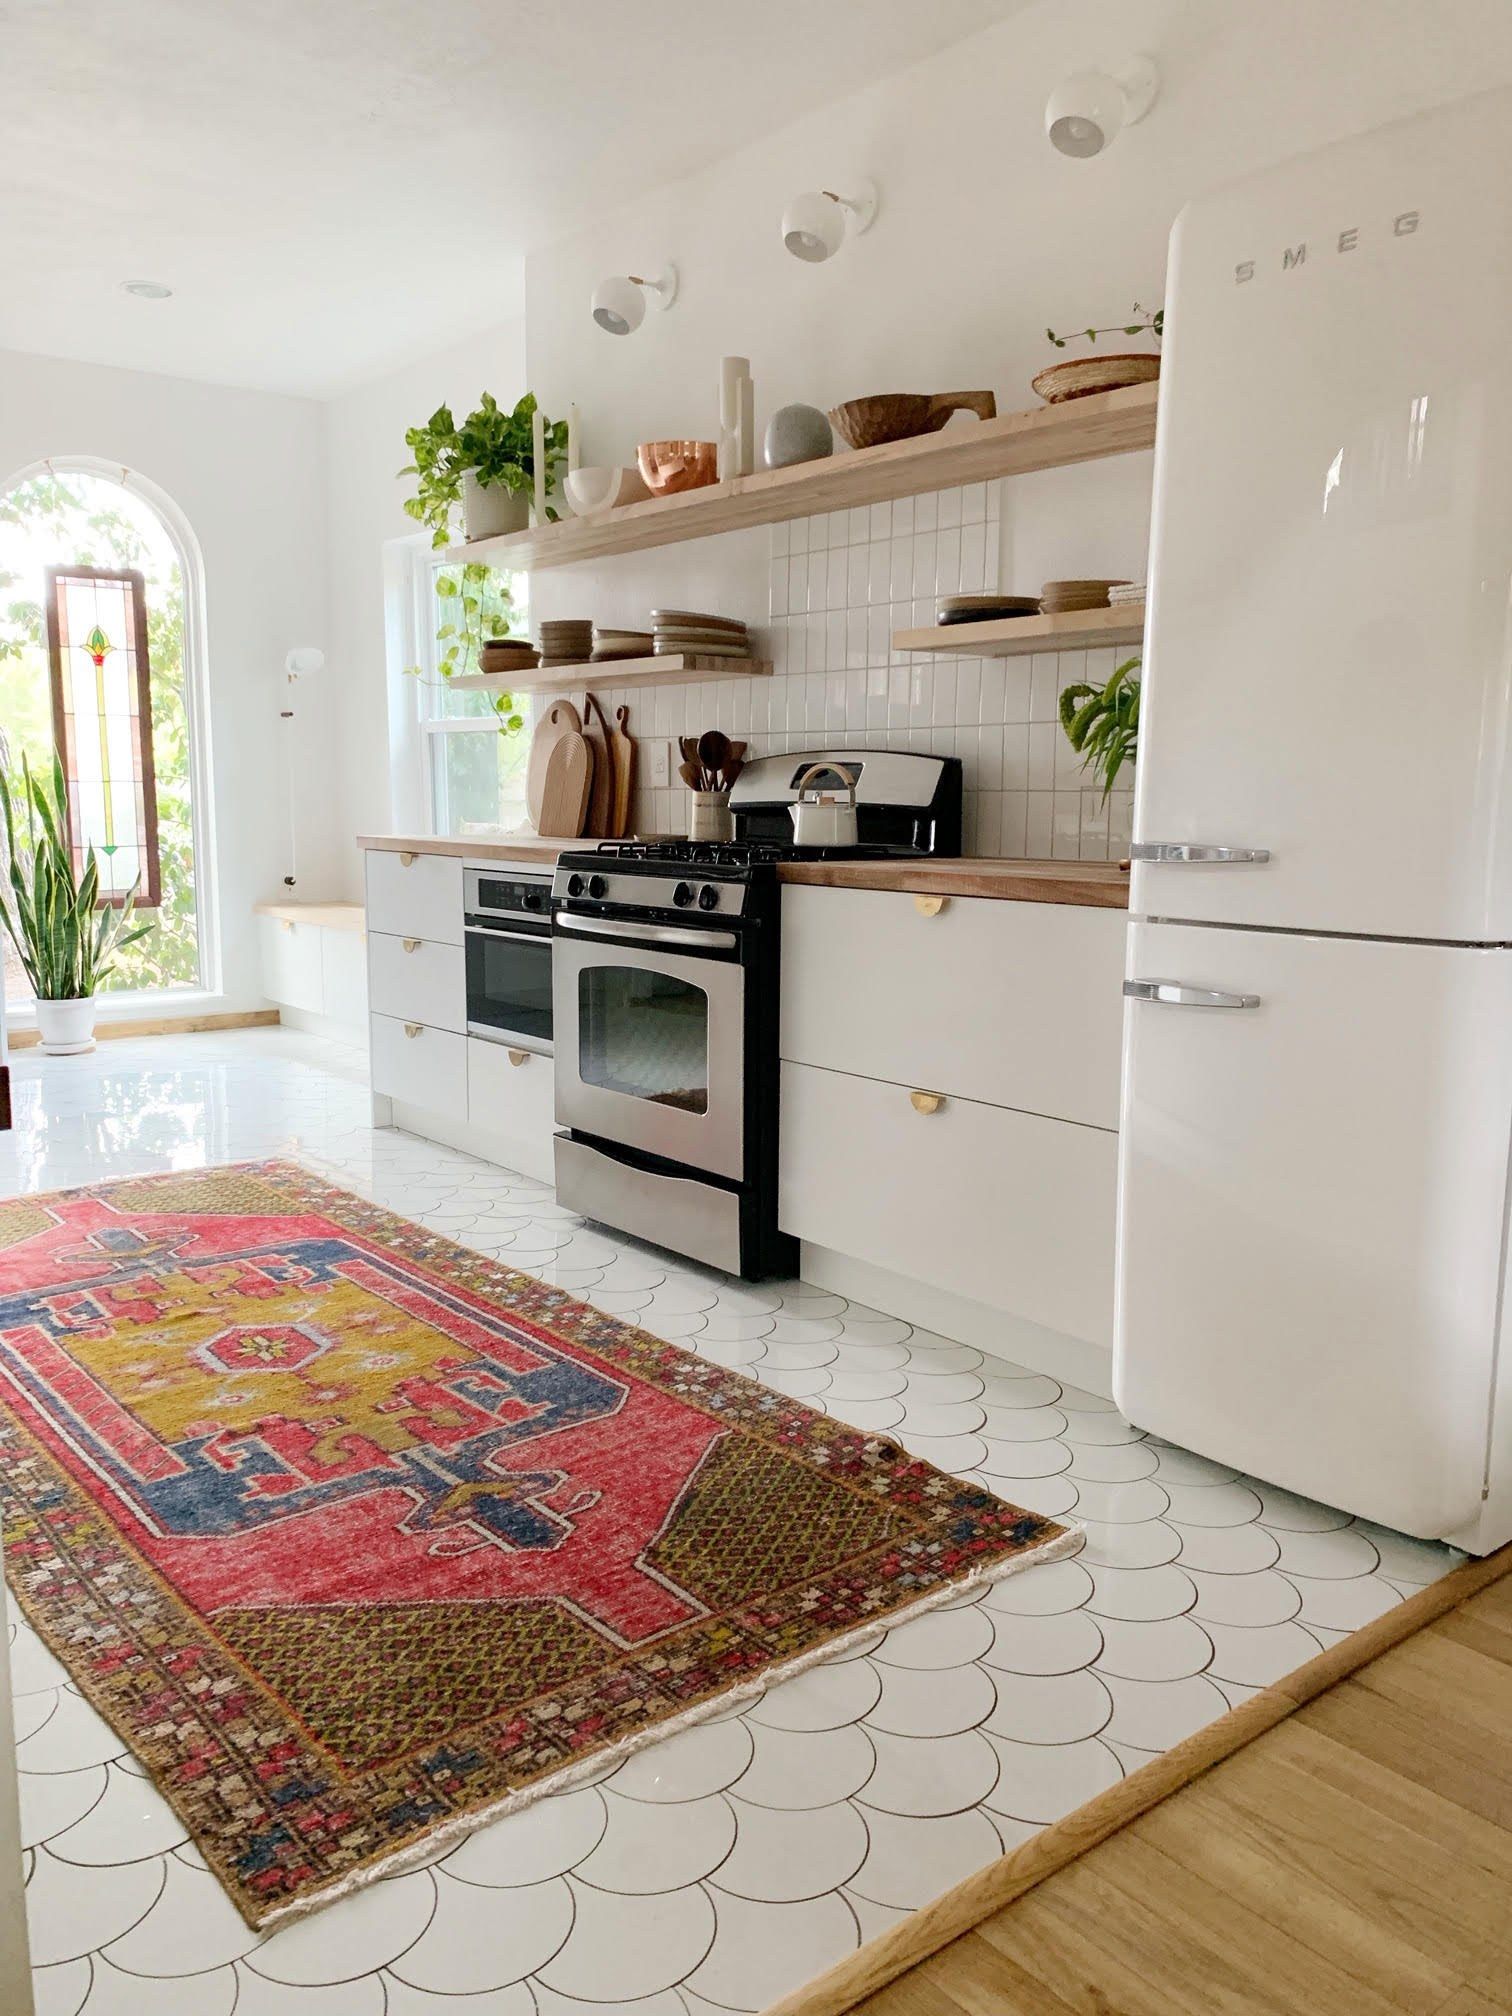 Kitchen Floor Tiles: Finding the Perfect Balance of Style and Durability